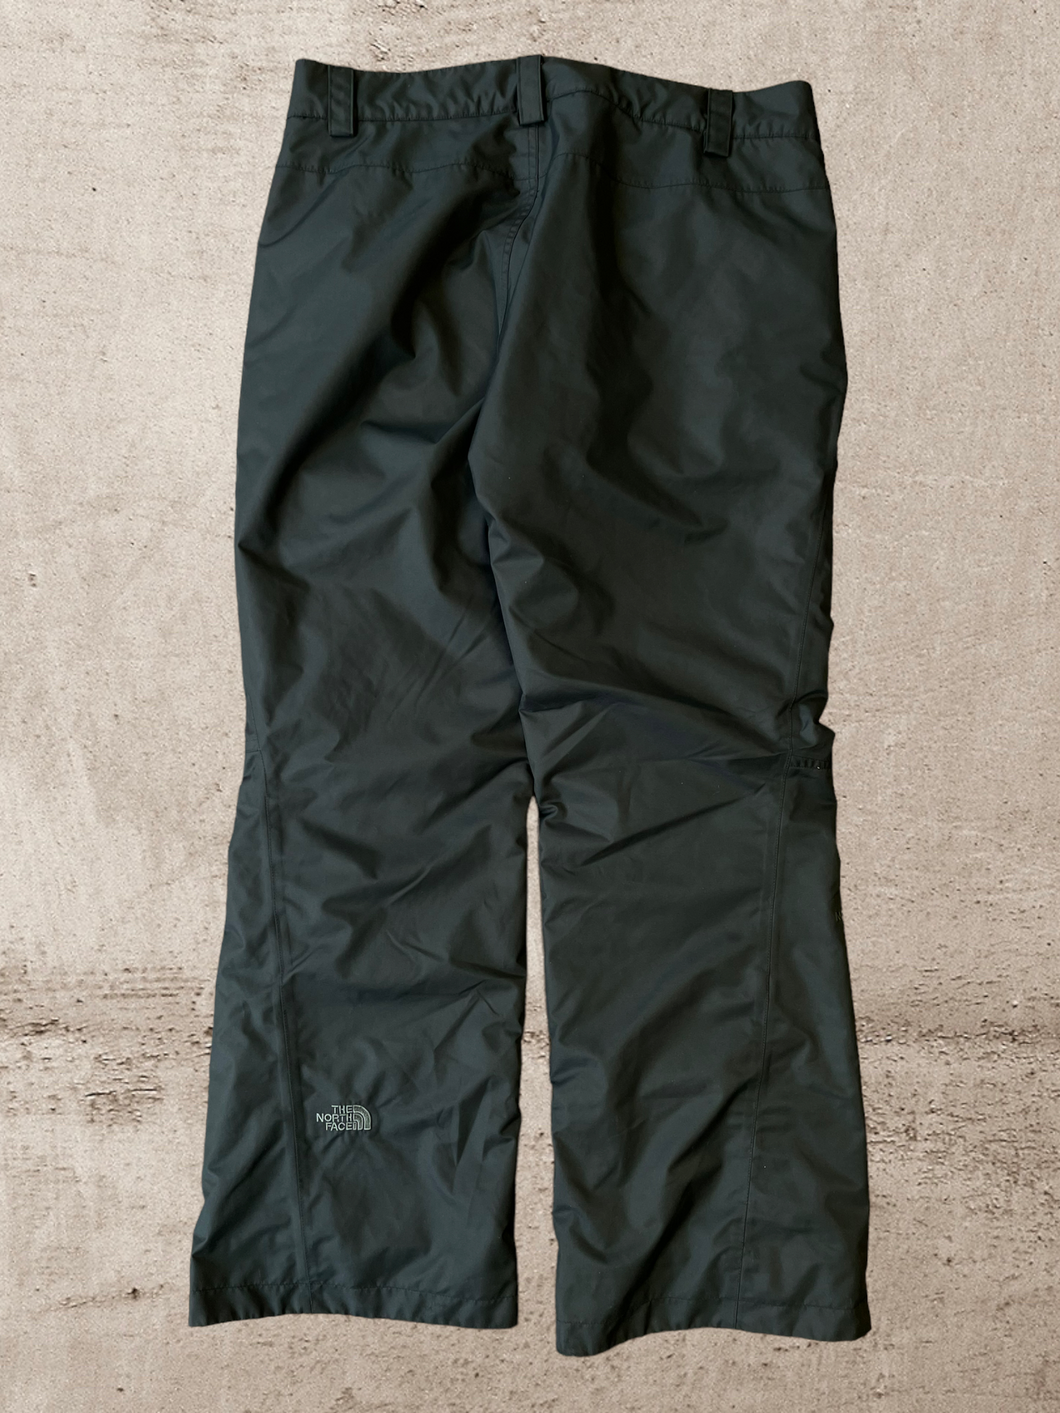 North Face Hyvent Baggy Snow Pants - 36x32